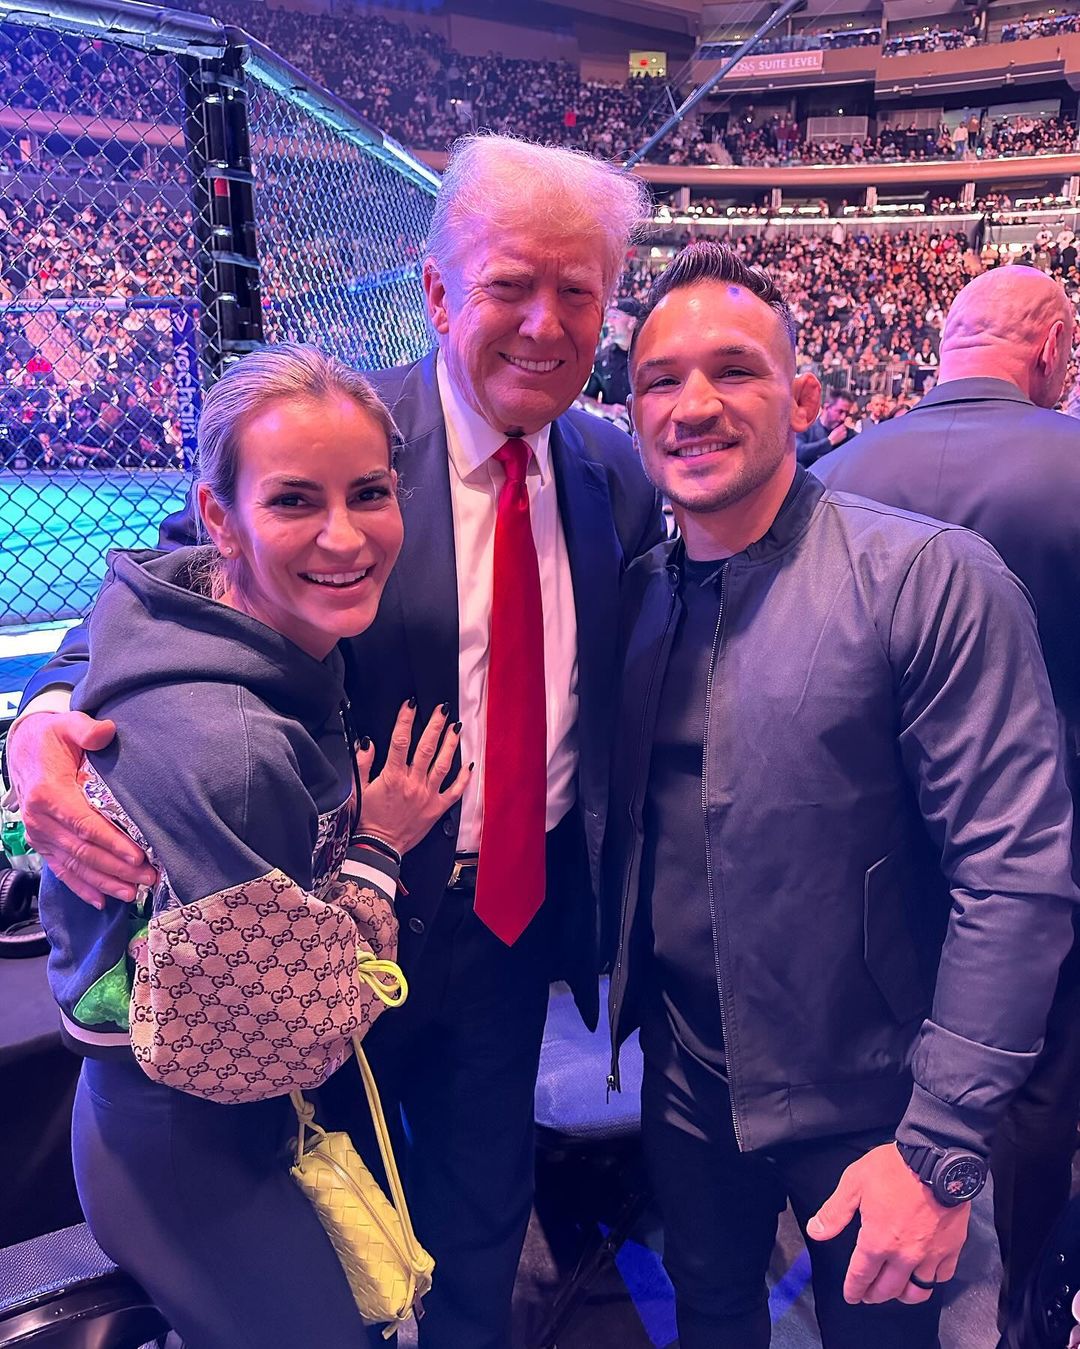 Chandler and wife were pleased to meet Trump at UFC 295